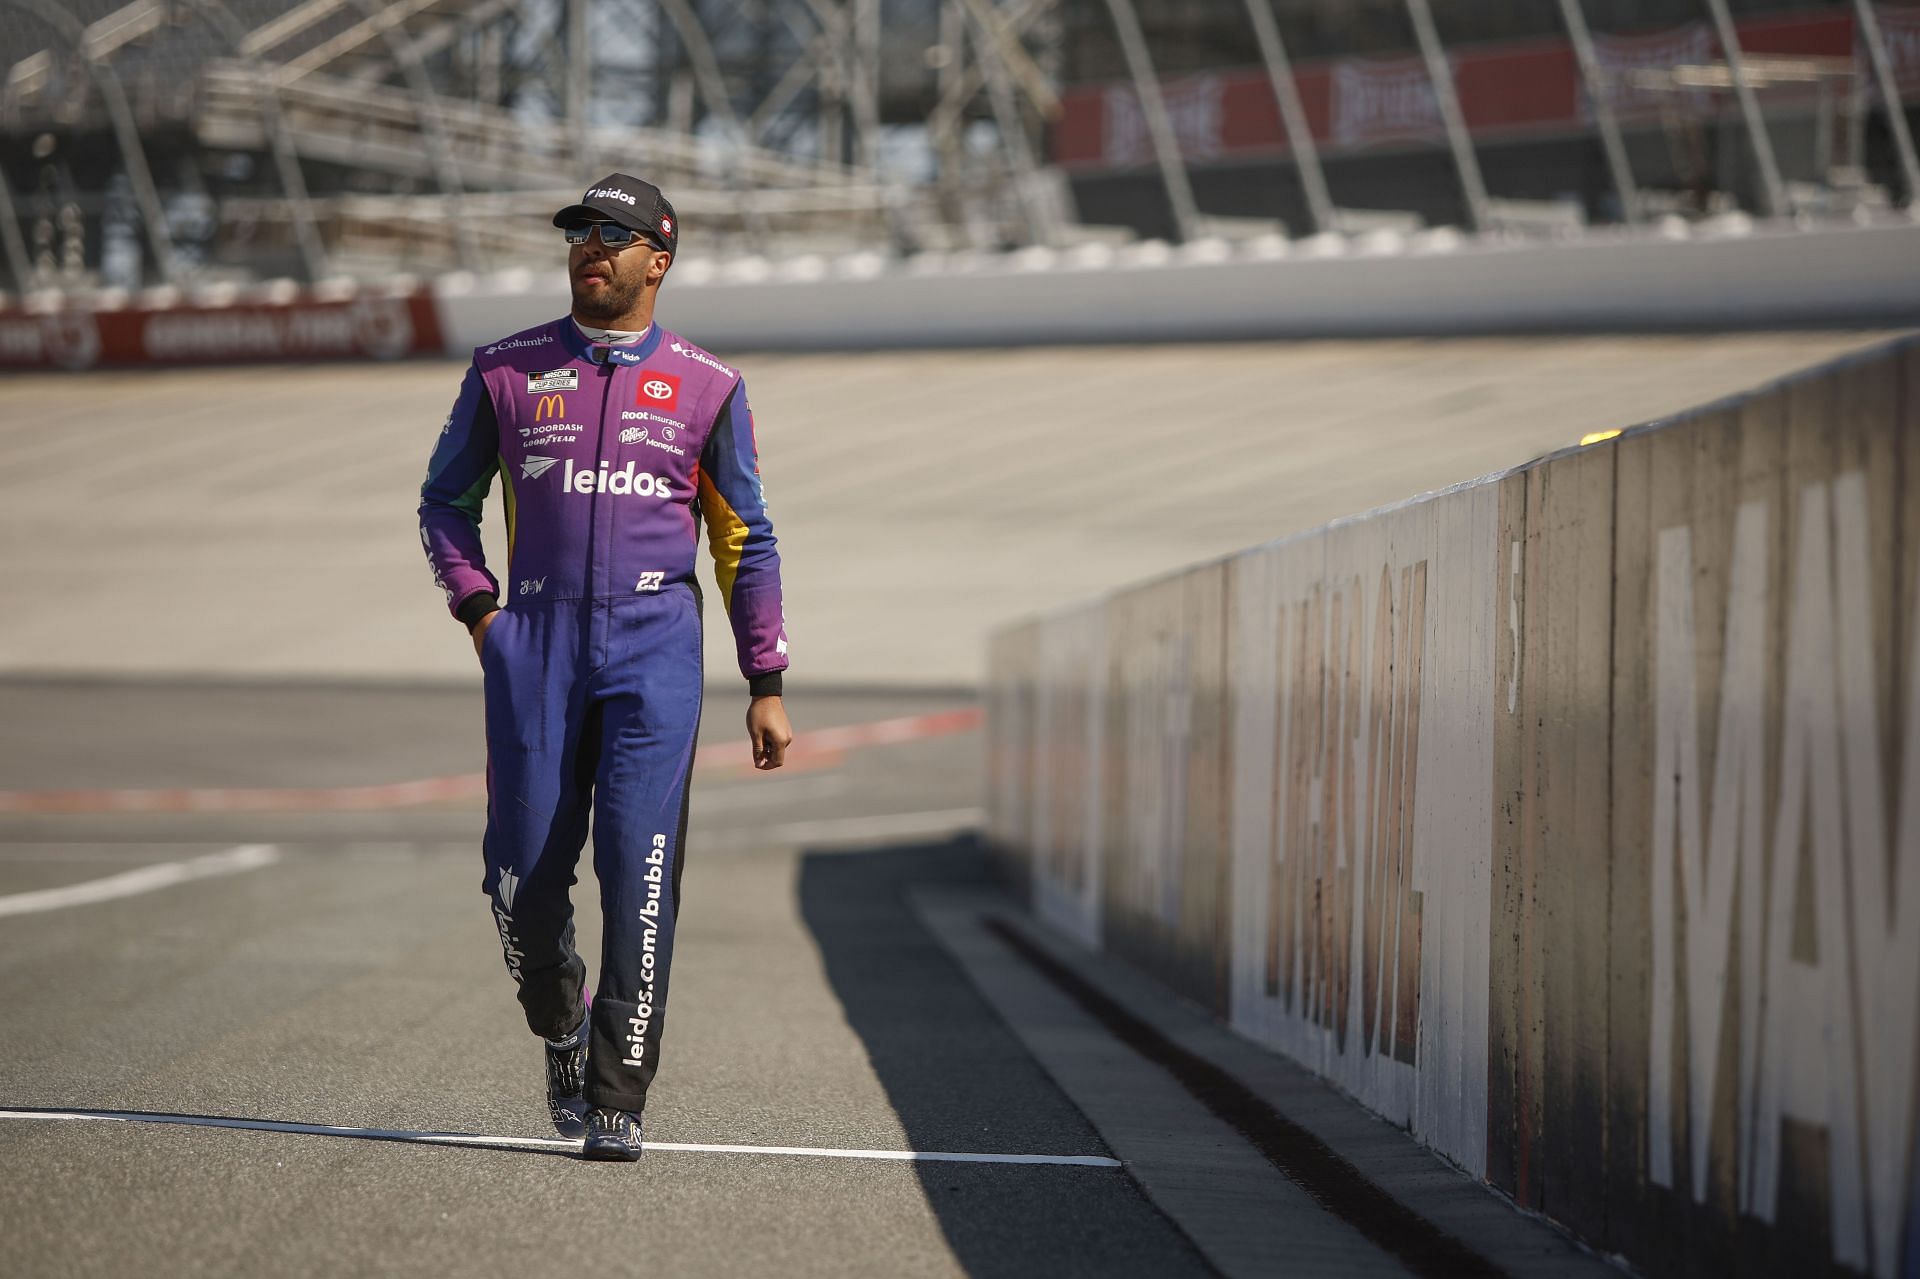 Bubba Wallace Jr. walks the grid during practice for the DuraMAX Drydene 400 presented by RelaDyne at Dover Motor Speedway.